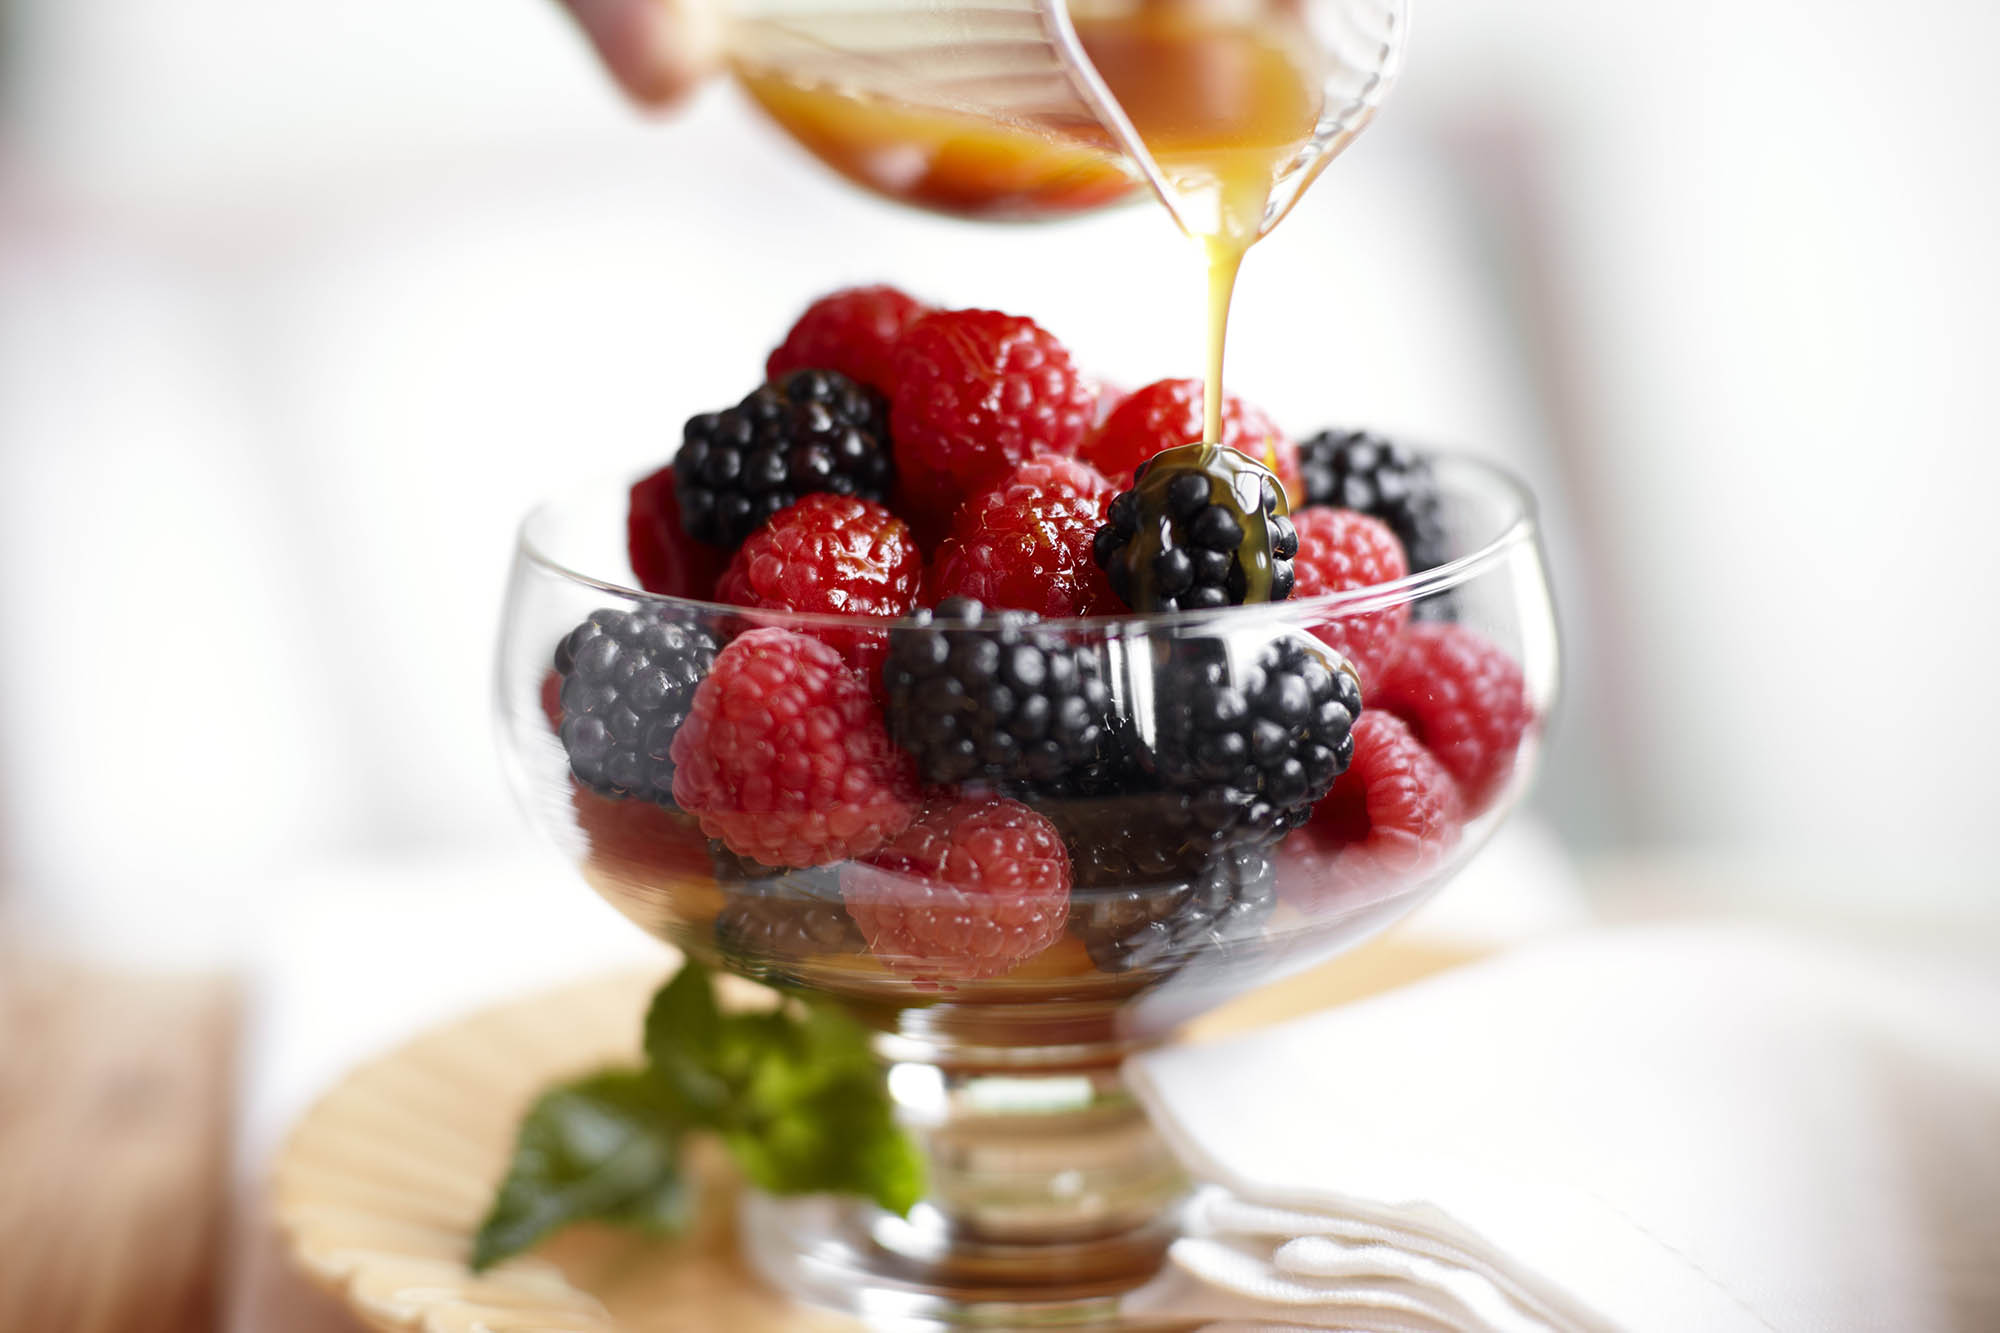 Mixed Berries with Orange Buttered Rum Sauce